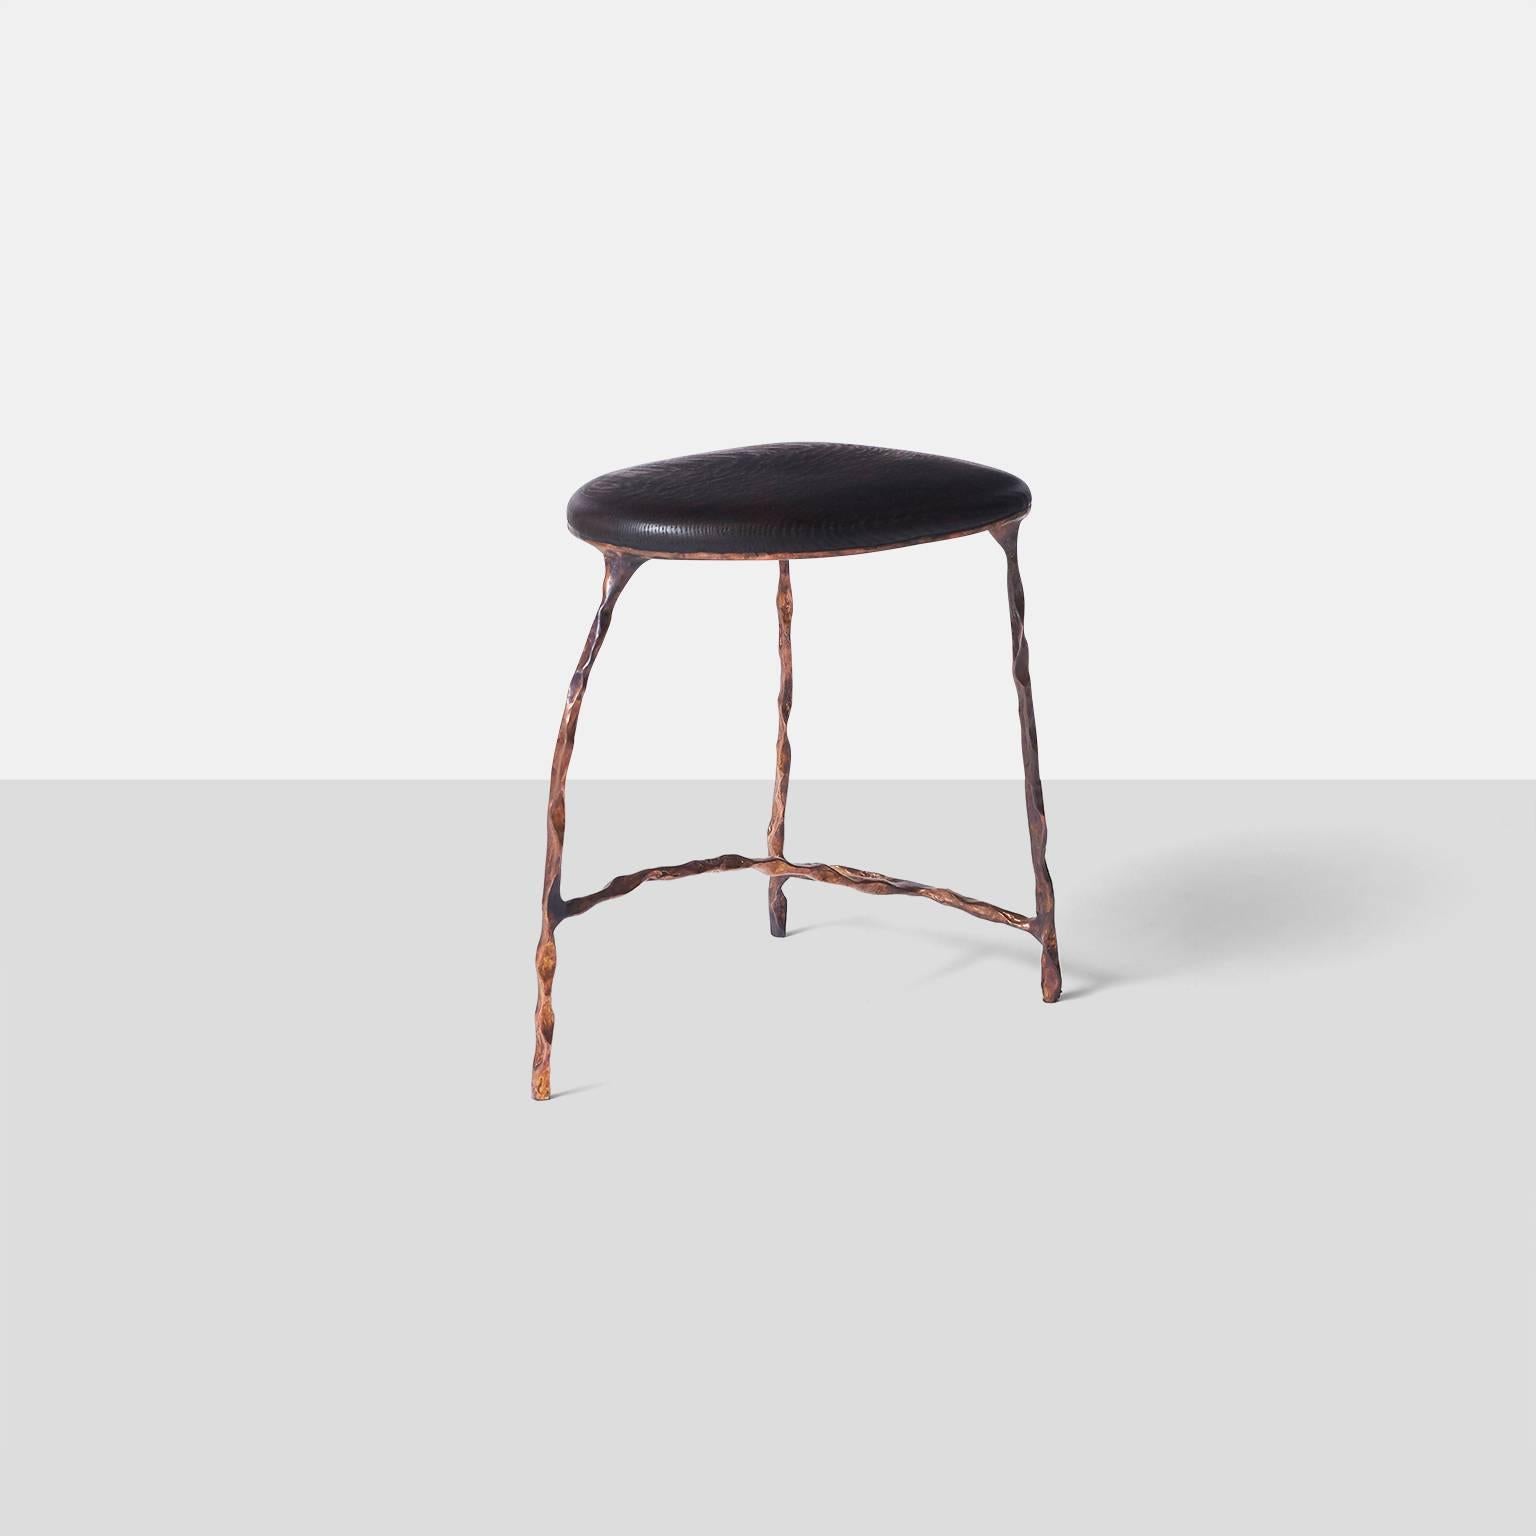 A handmade stool or side table with tripod shape, blackened oak seat and a base of hand-forged copper. All pieces are limited edition signed and numbered.
Valentin Loellmann was an award winner at PAD London for Best Contemporary Design